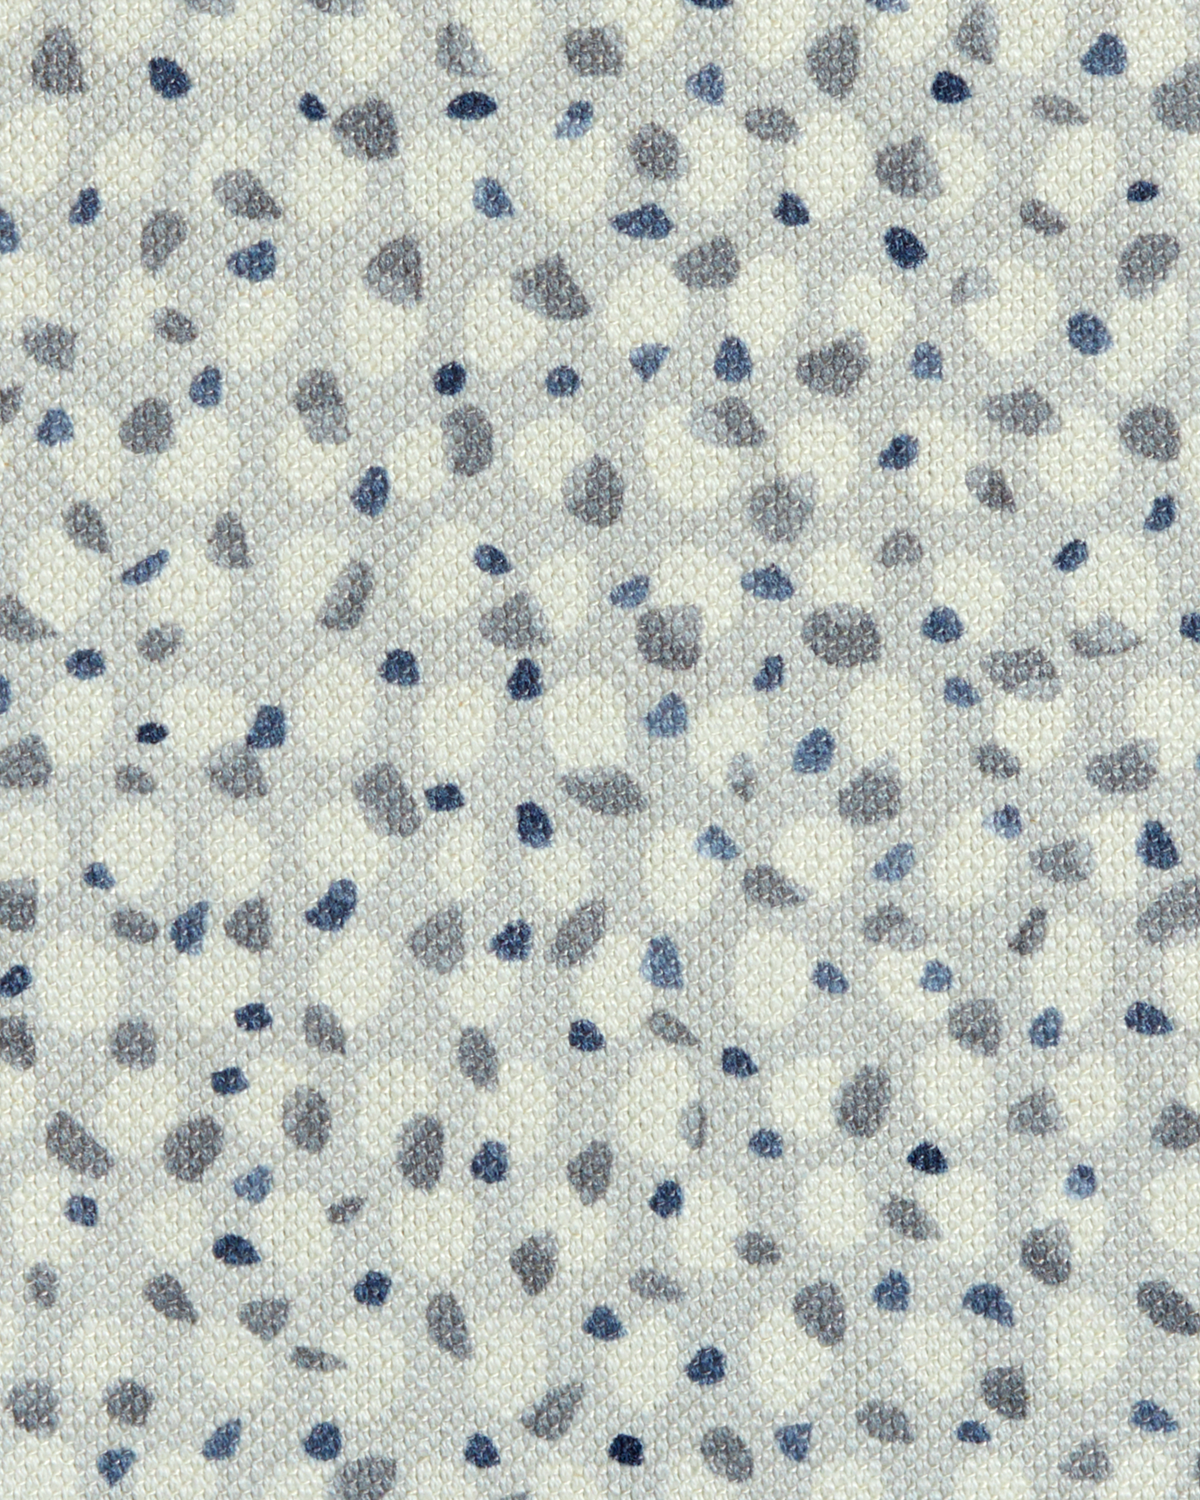 Scattered Dot Fabric in Gray-Blue